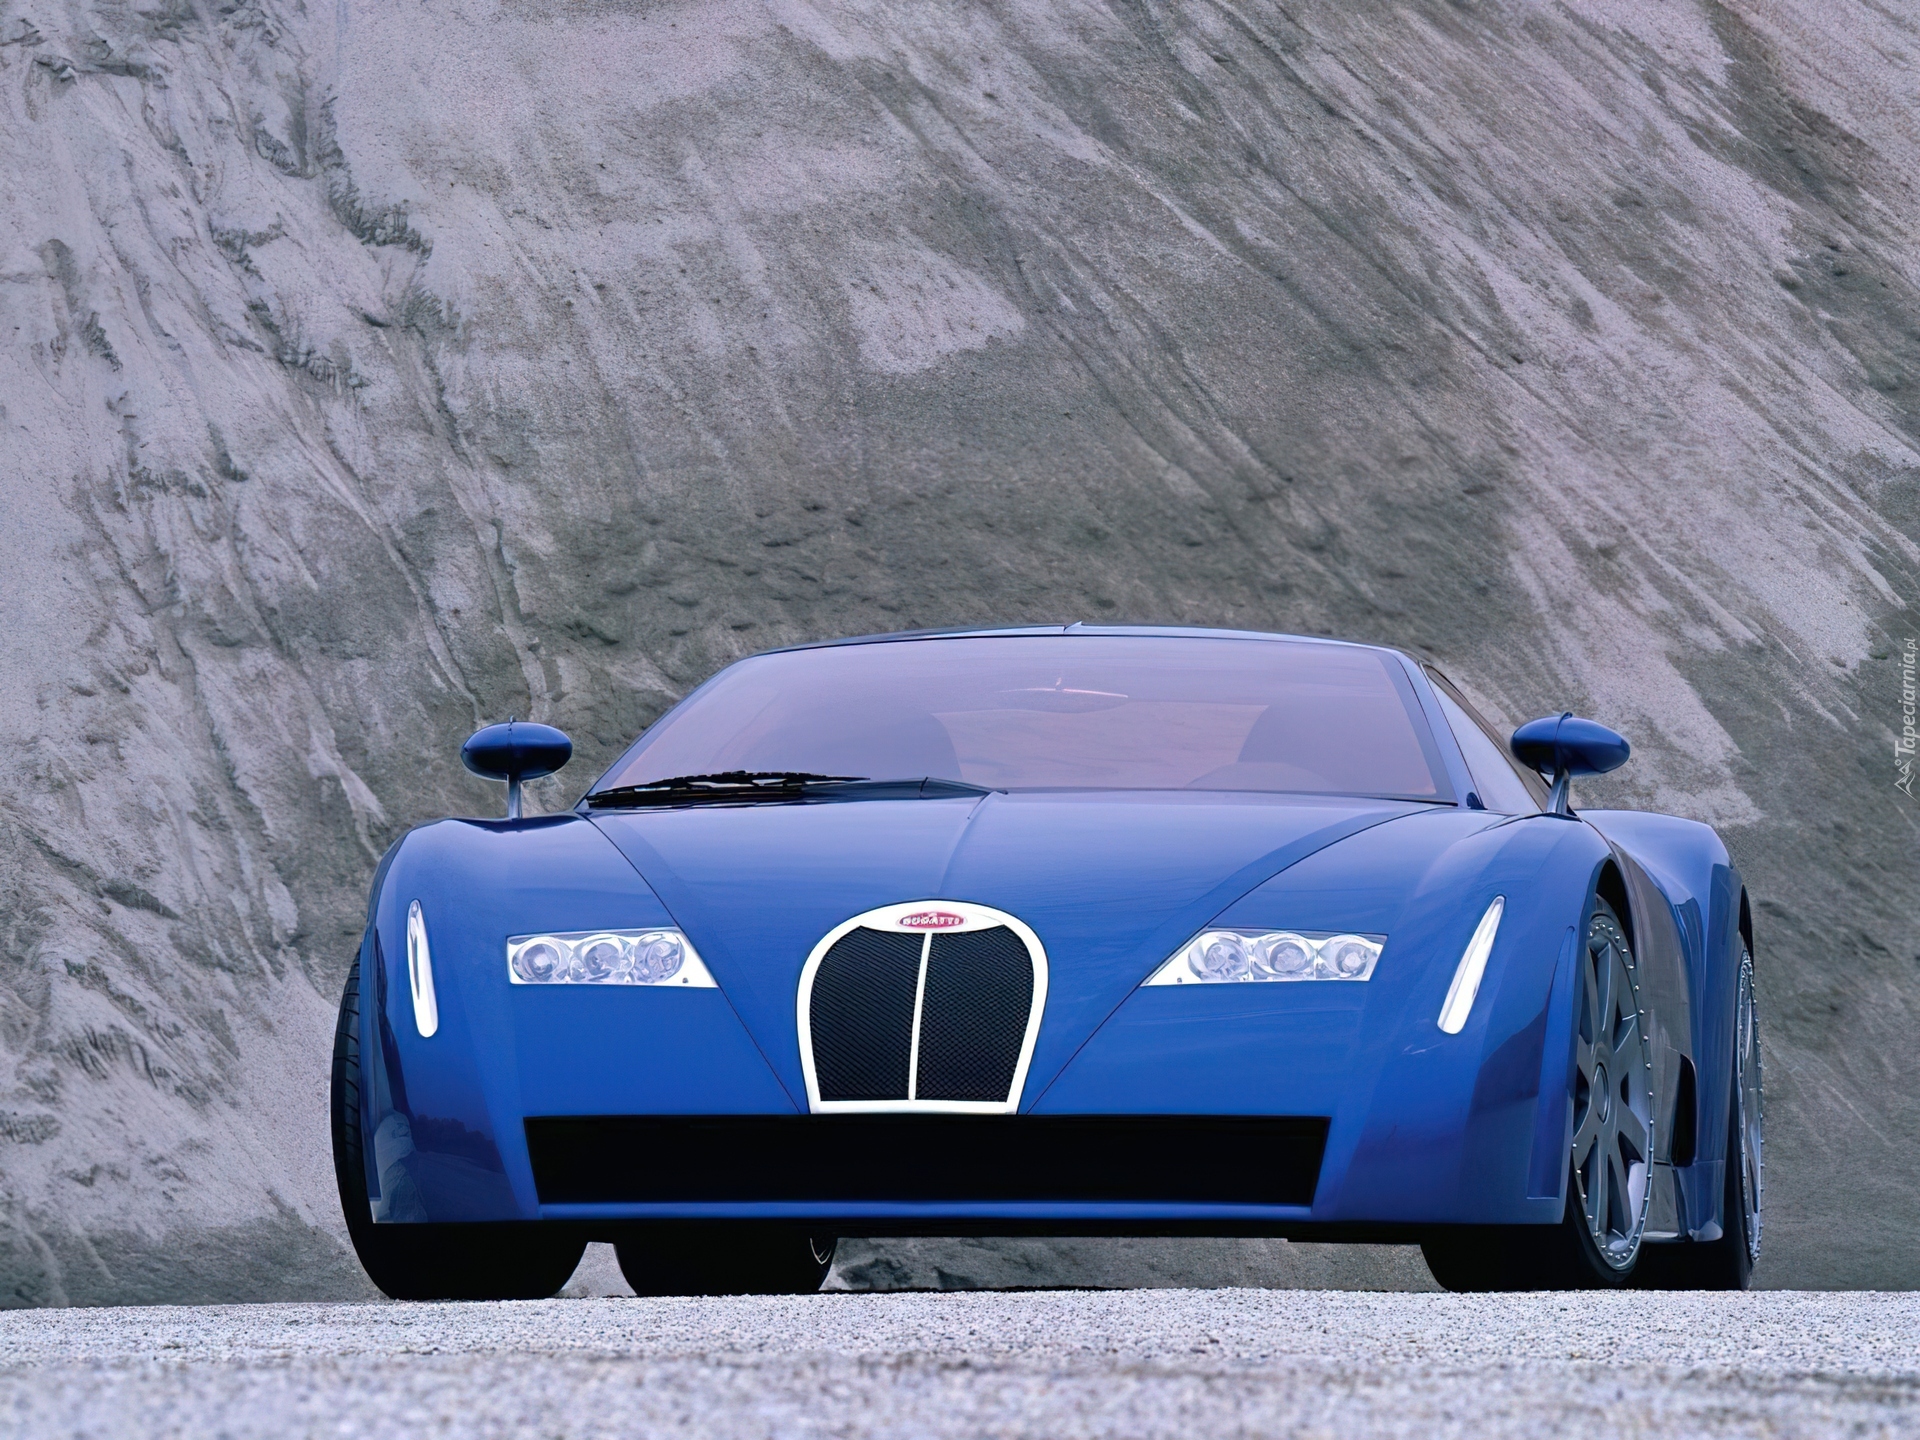 Bugatti 18. Bugatti Veyron 1999. Bugatti Veyron Concept 1999. Bugatti 18/3 Chiron Concept.